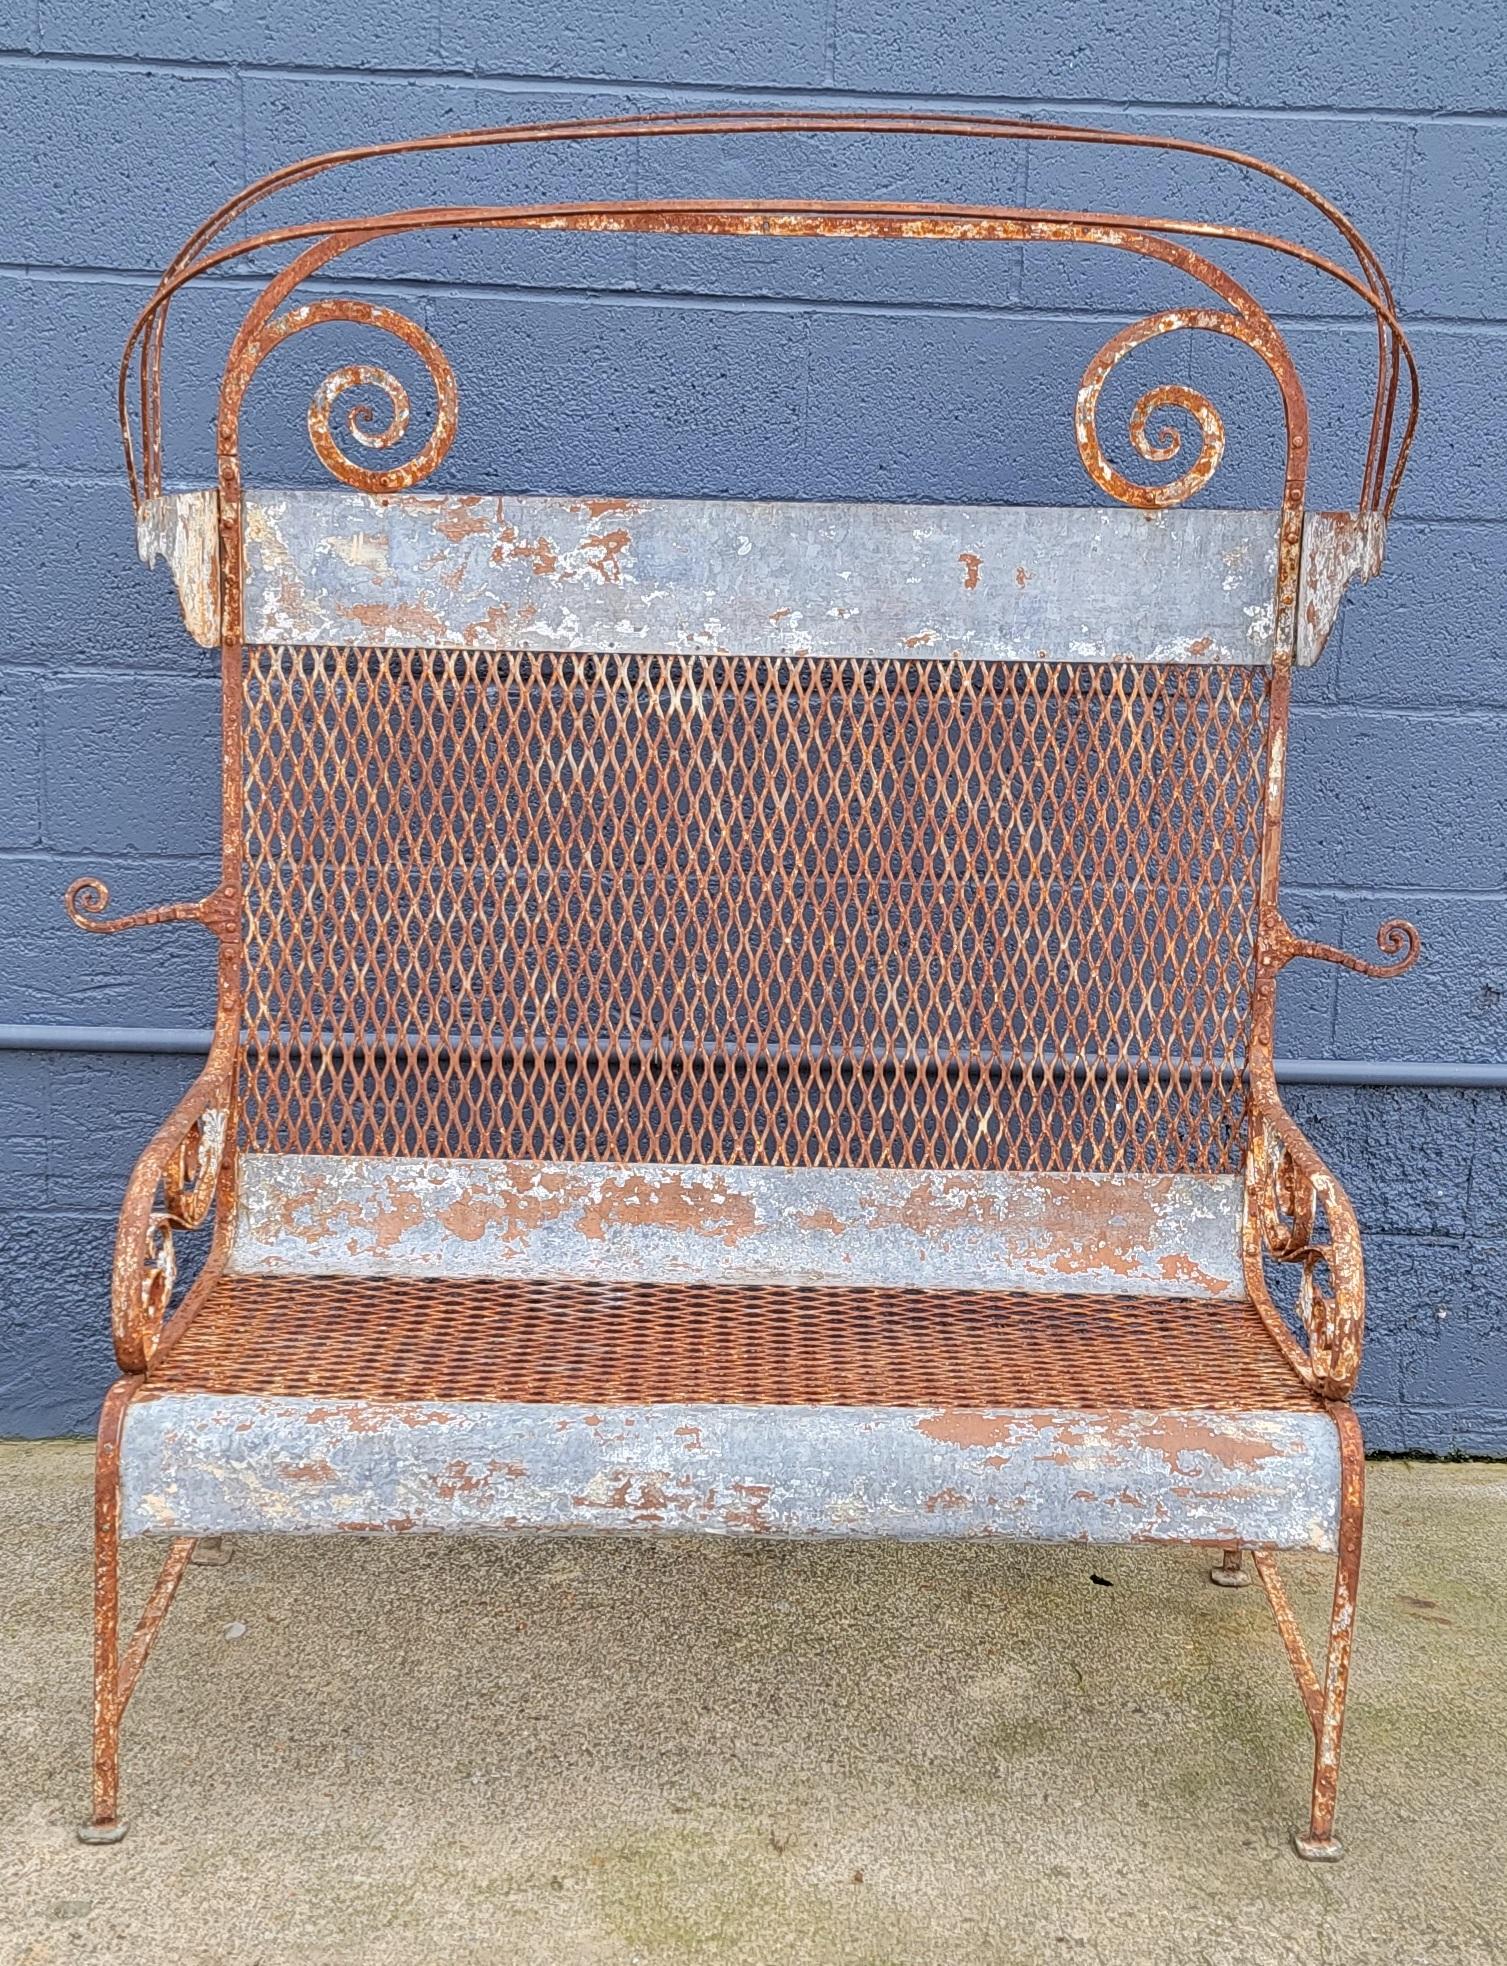 Iron Garden Bench with Folding Canopy / Umbrella In Good Condition For Sale In Fulton, CA